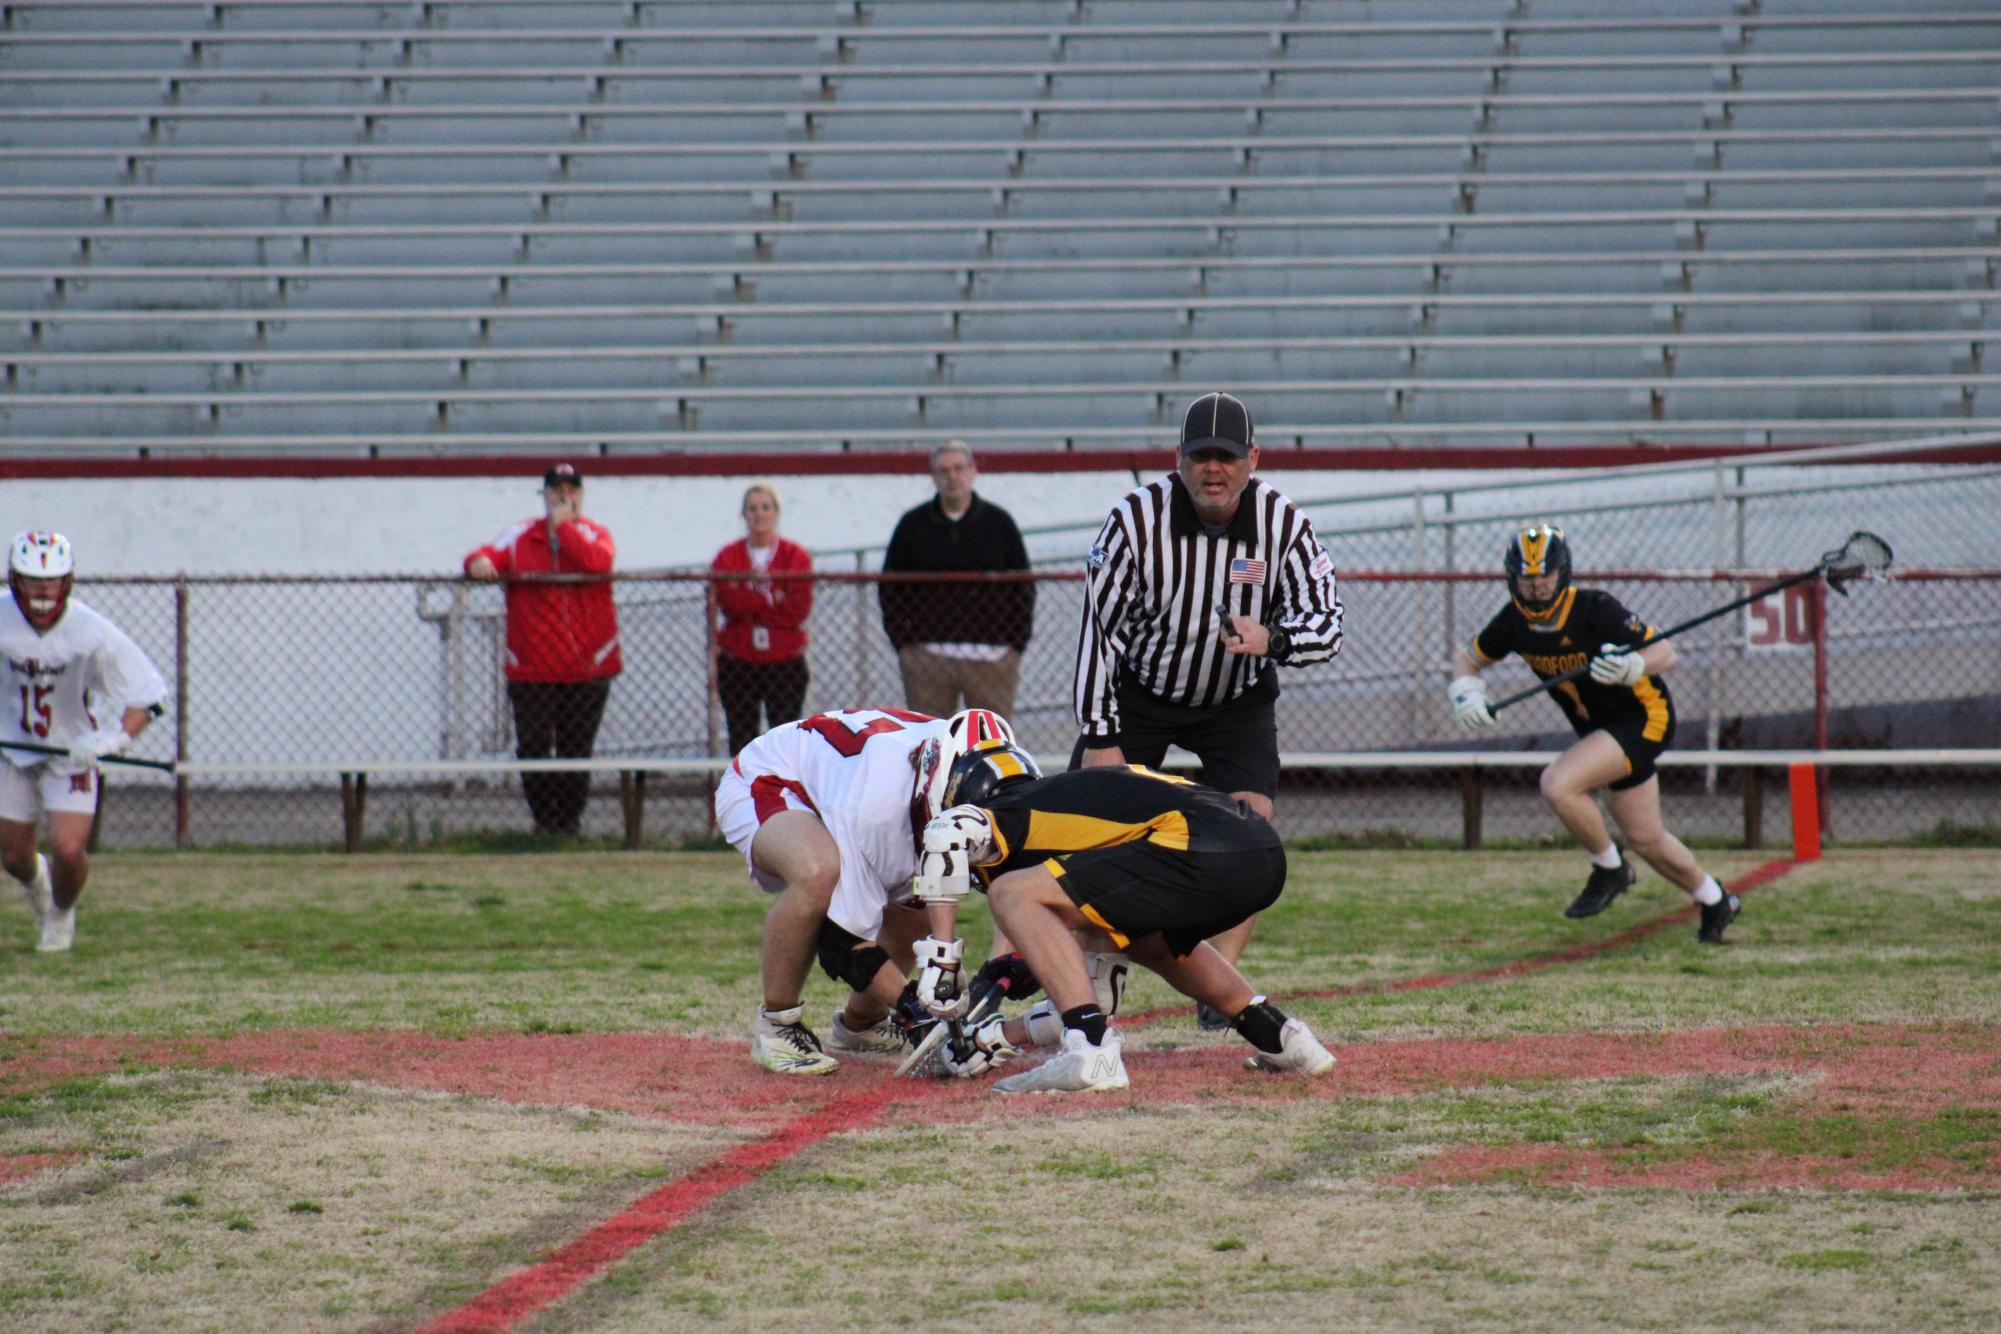 Luca Bowling (#37, 12) doing the face-off against a Woodford player. Photo by Lydia Adams